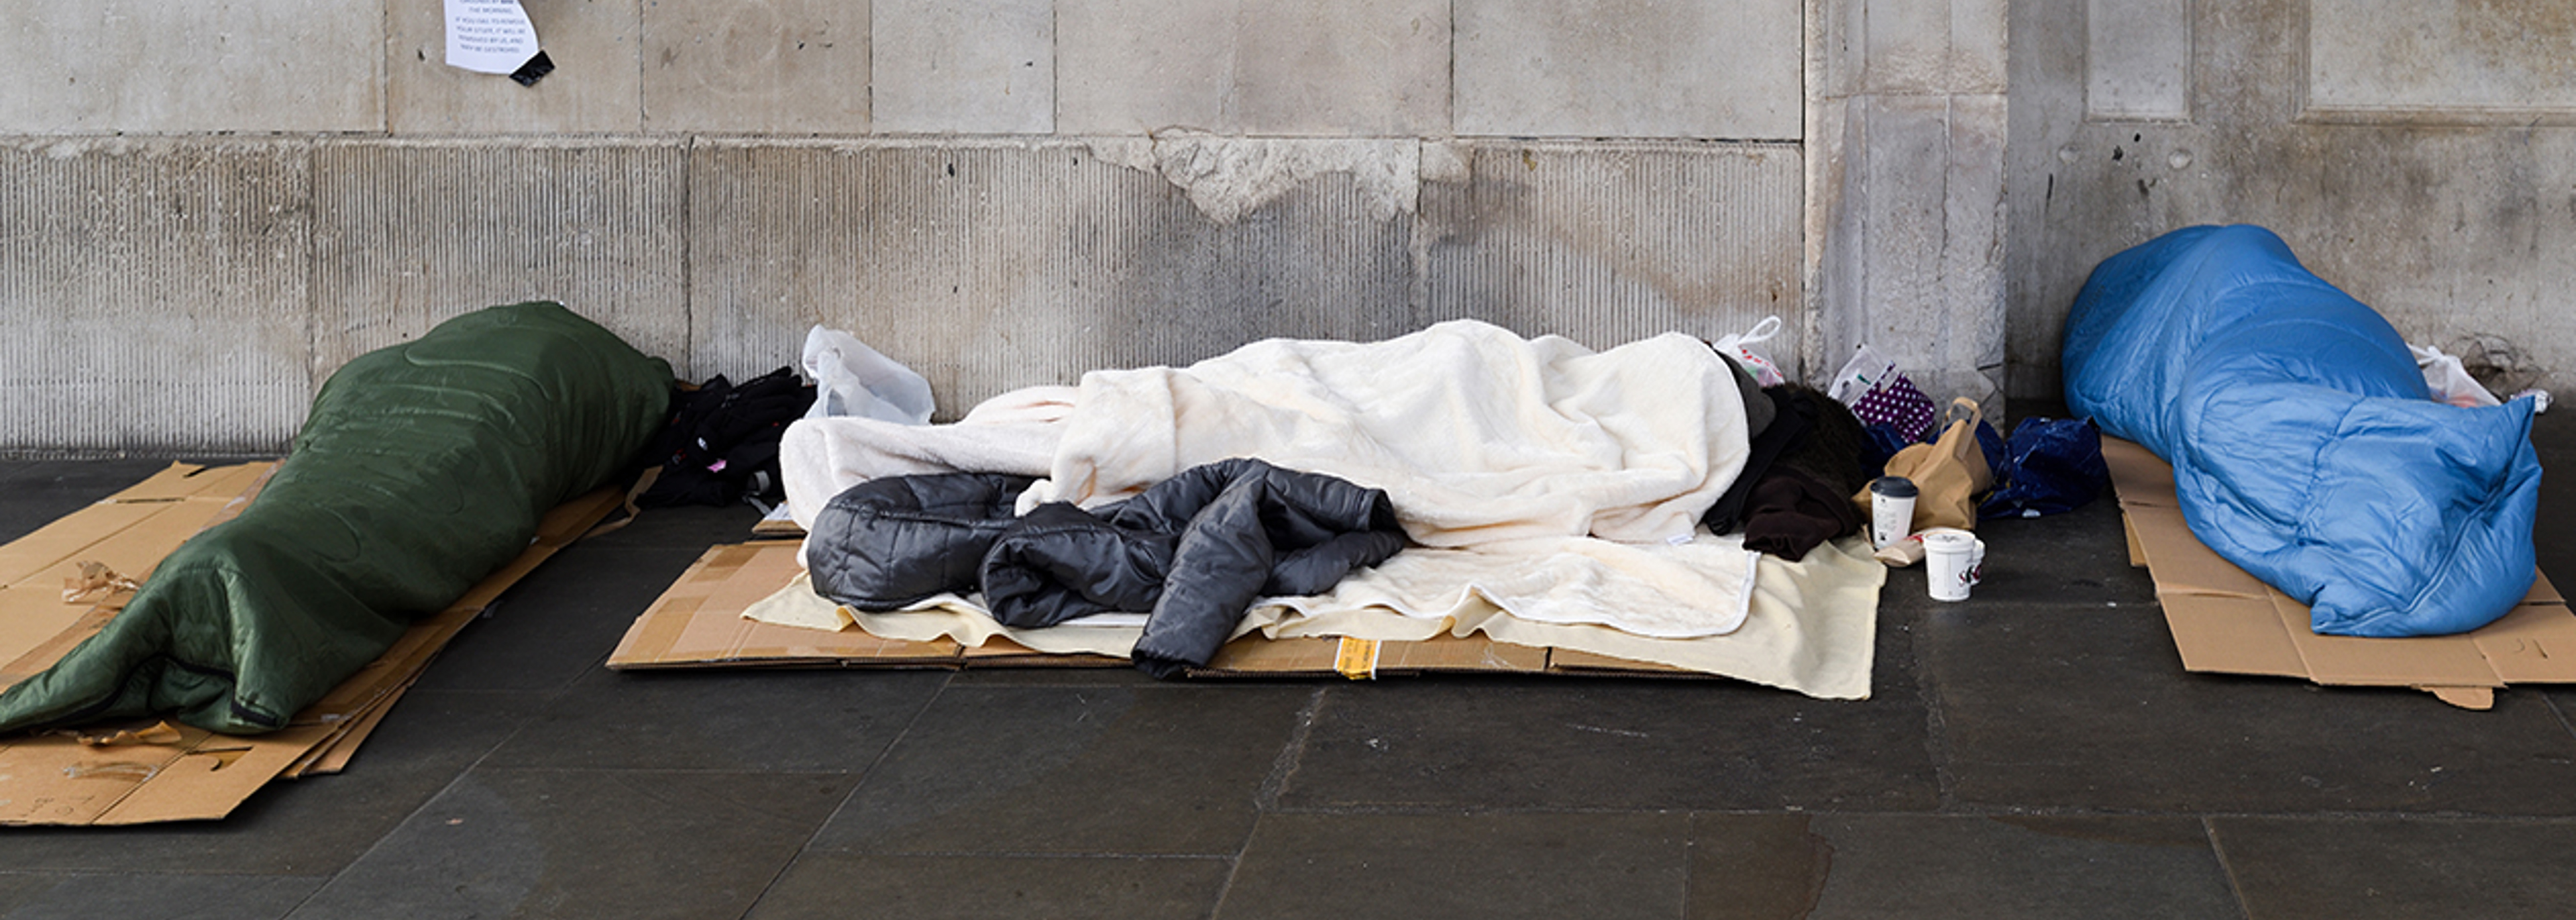 Tales from the front line: ‘For rough sleepers, accommodation is only one part of the issue’